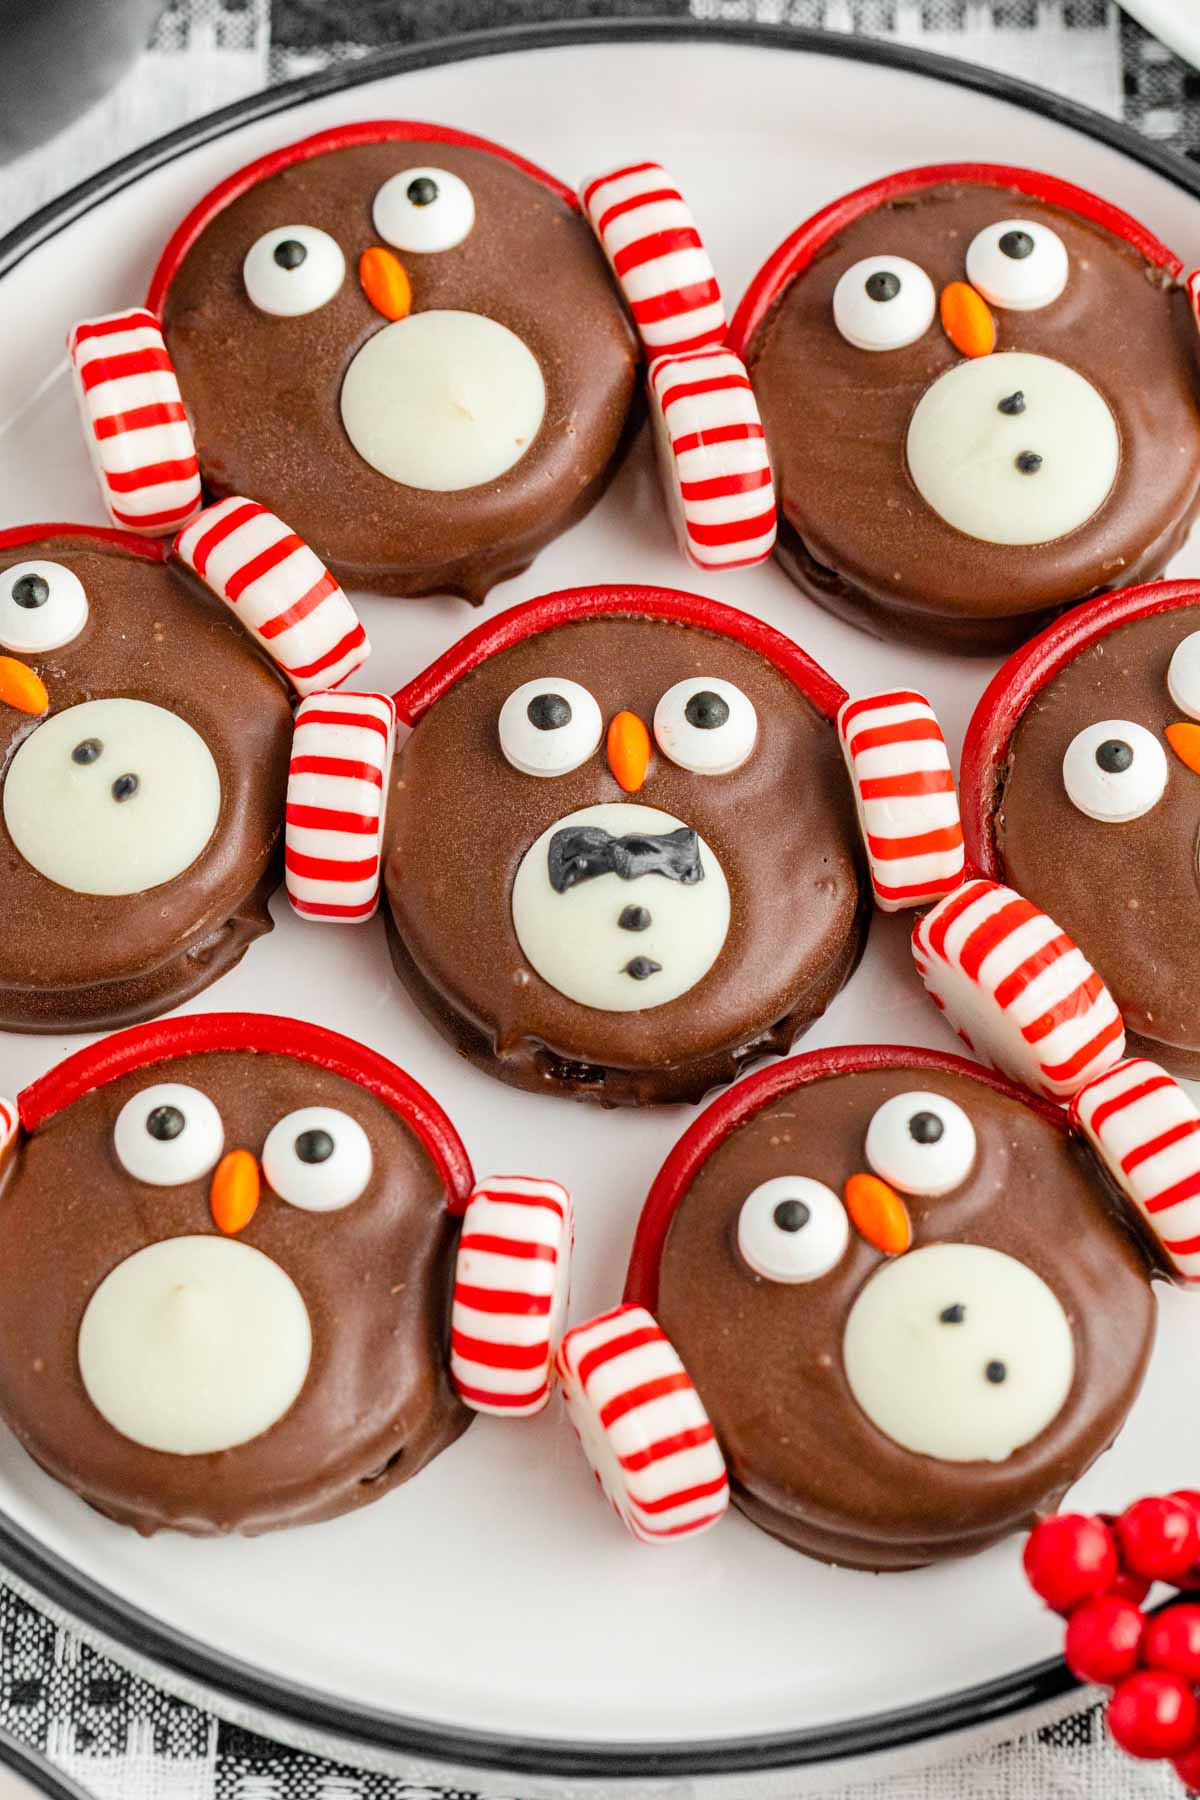 Chocolate owl cookies with candy canes on a plate.